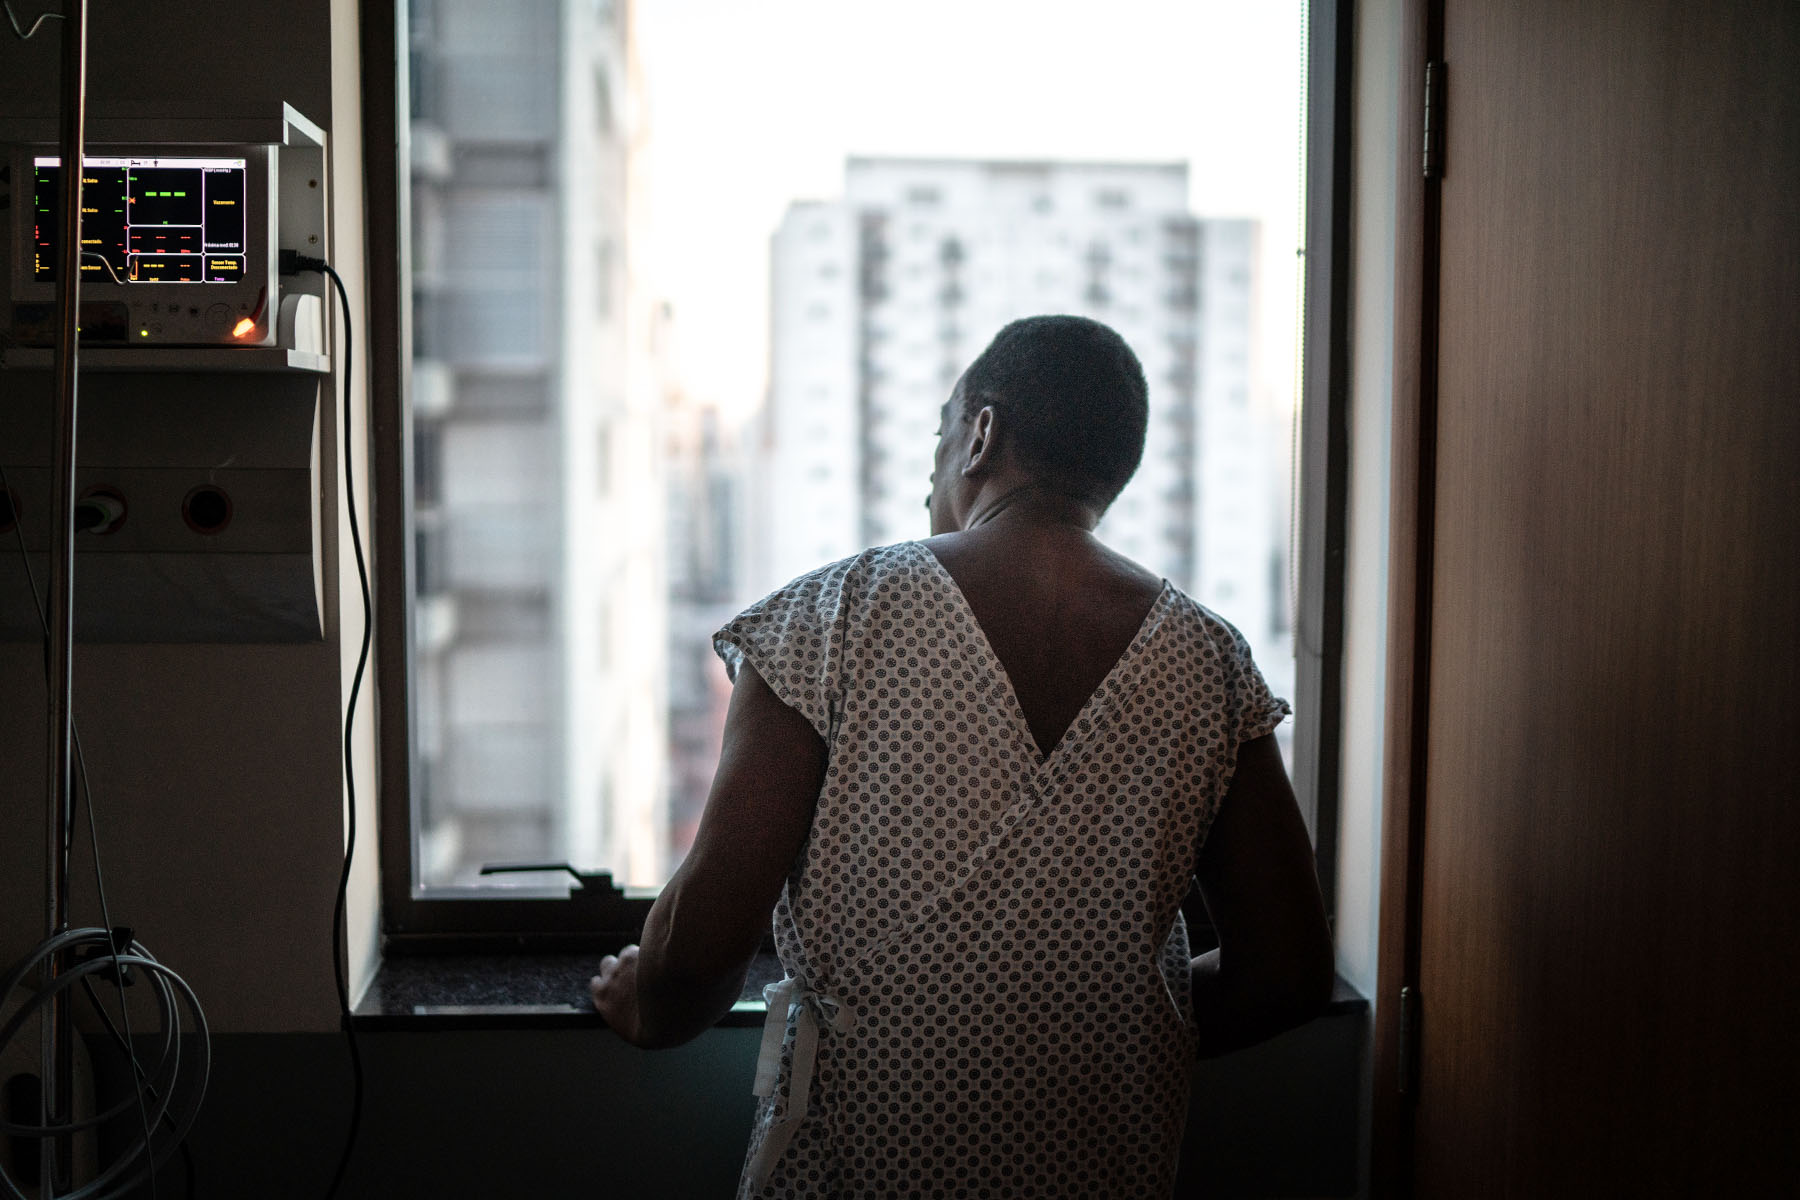 Rear view of a patient at the hospital looking through window.